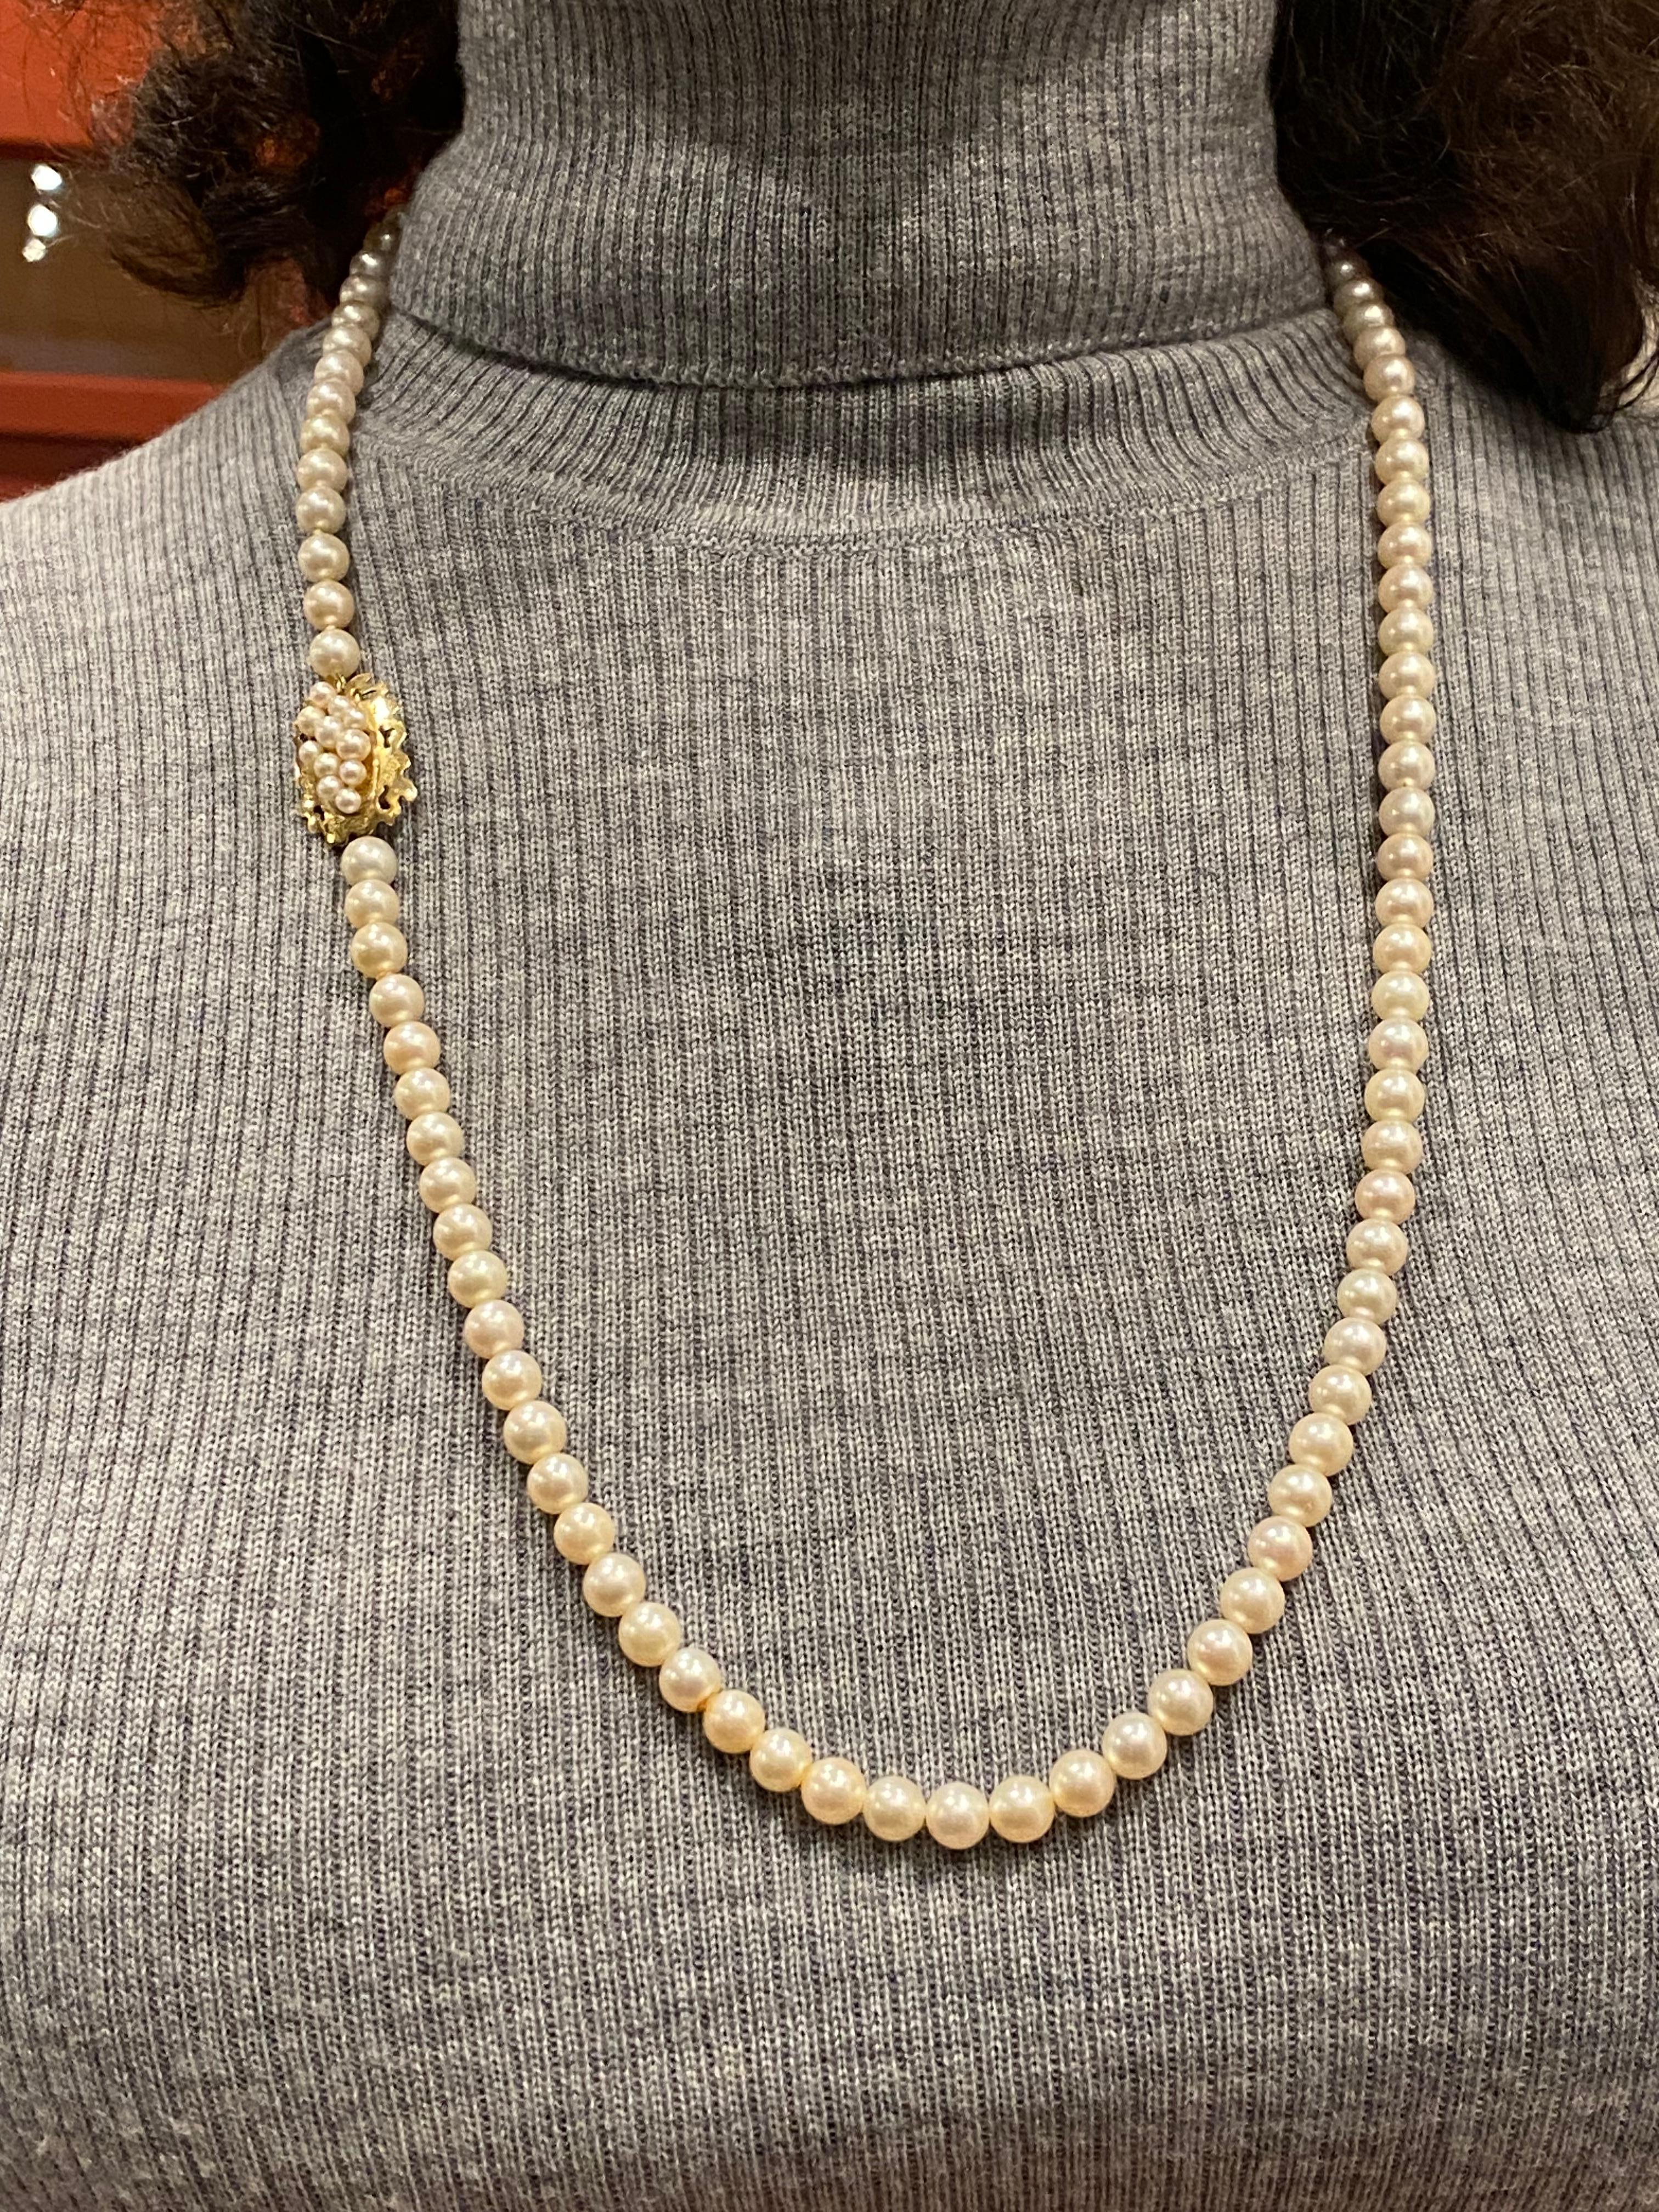 South Sea Pearl Opera Length 78cm (30.7 inches) Necklace 18K Gold & Pearl Clasp For Sale 2